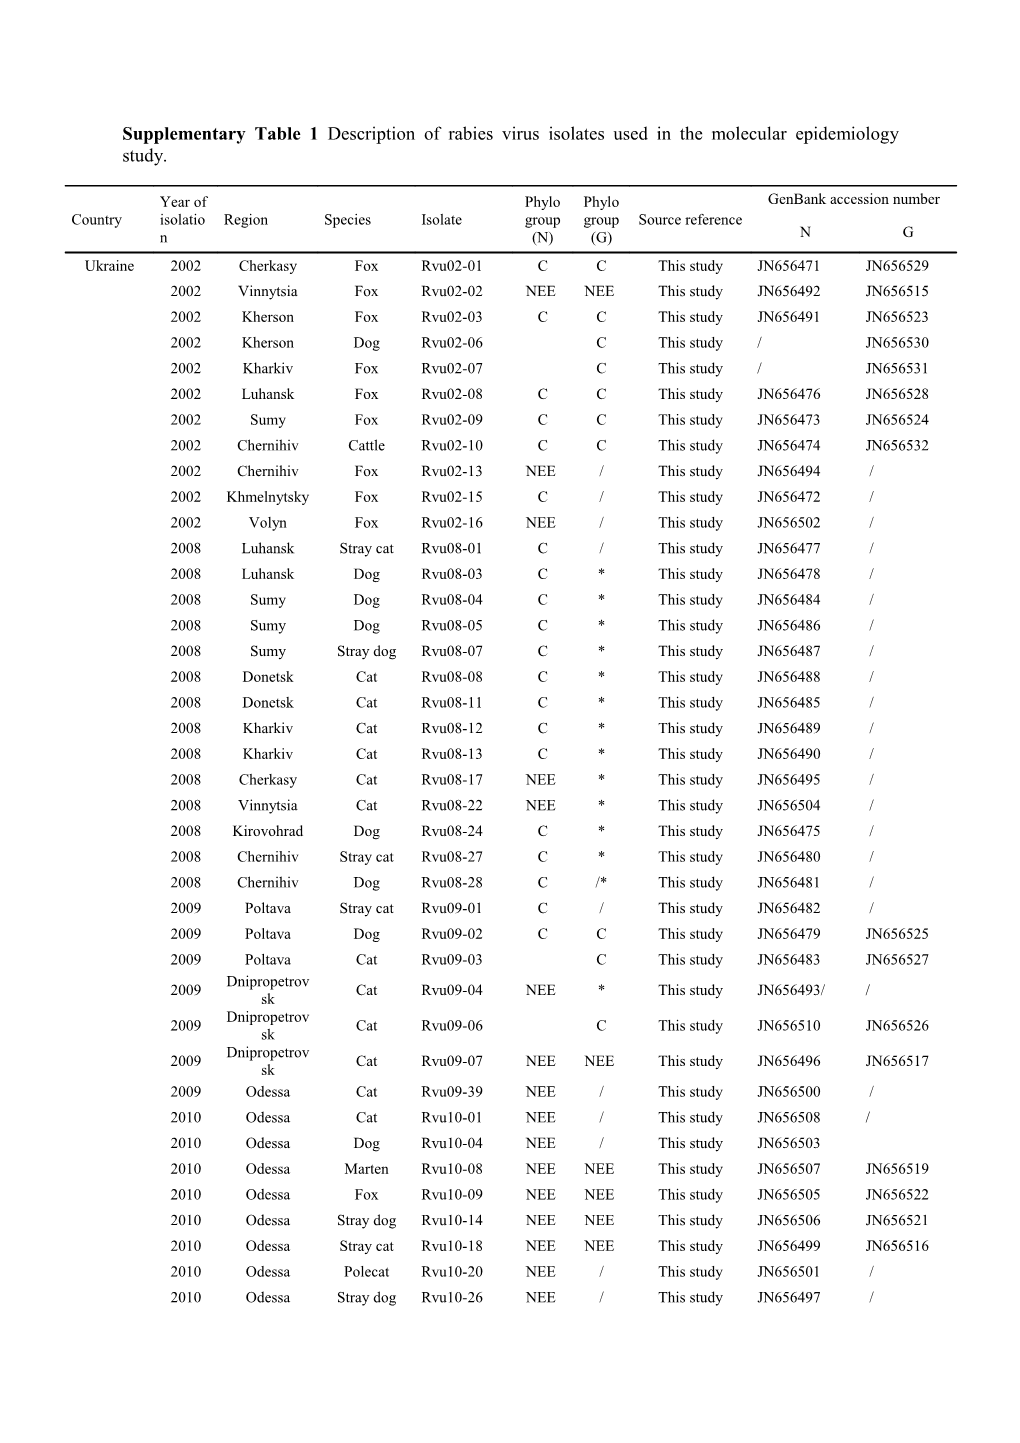 Supplementarytable 1 Description of Rabies Virus Isolates Used in the Molecular Epidemiology